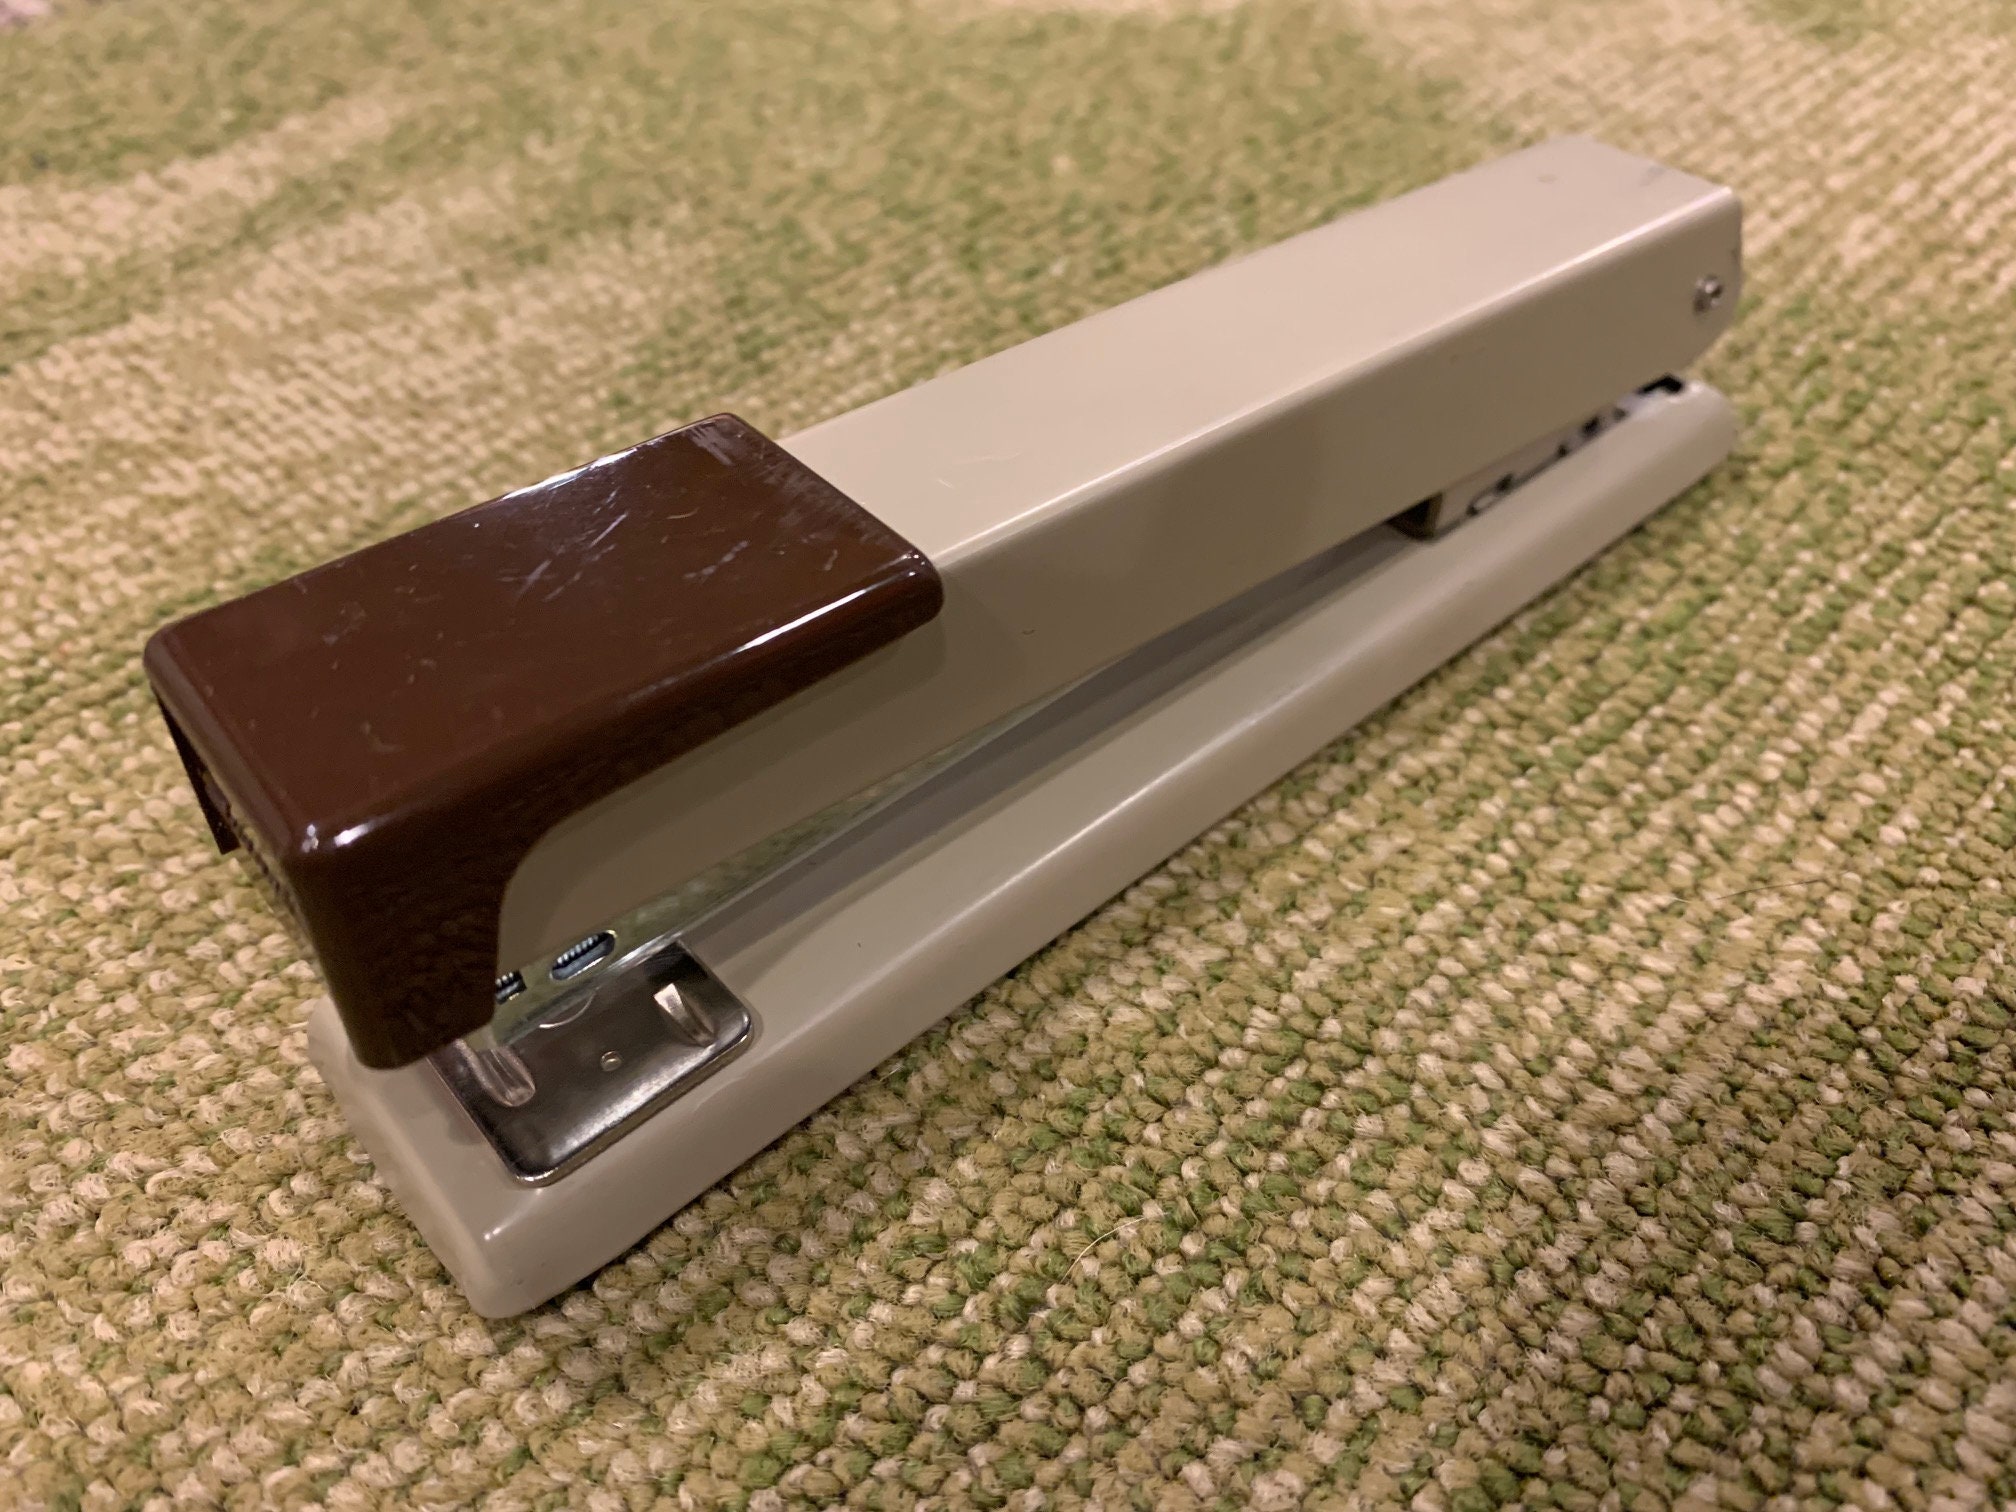 Vintage Swingline MODEL 66-A Automatic Electric Stapler / Hands Free Tool  for a Business or Home Office 